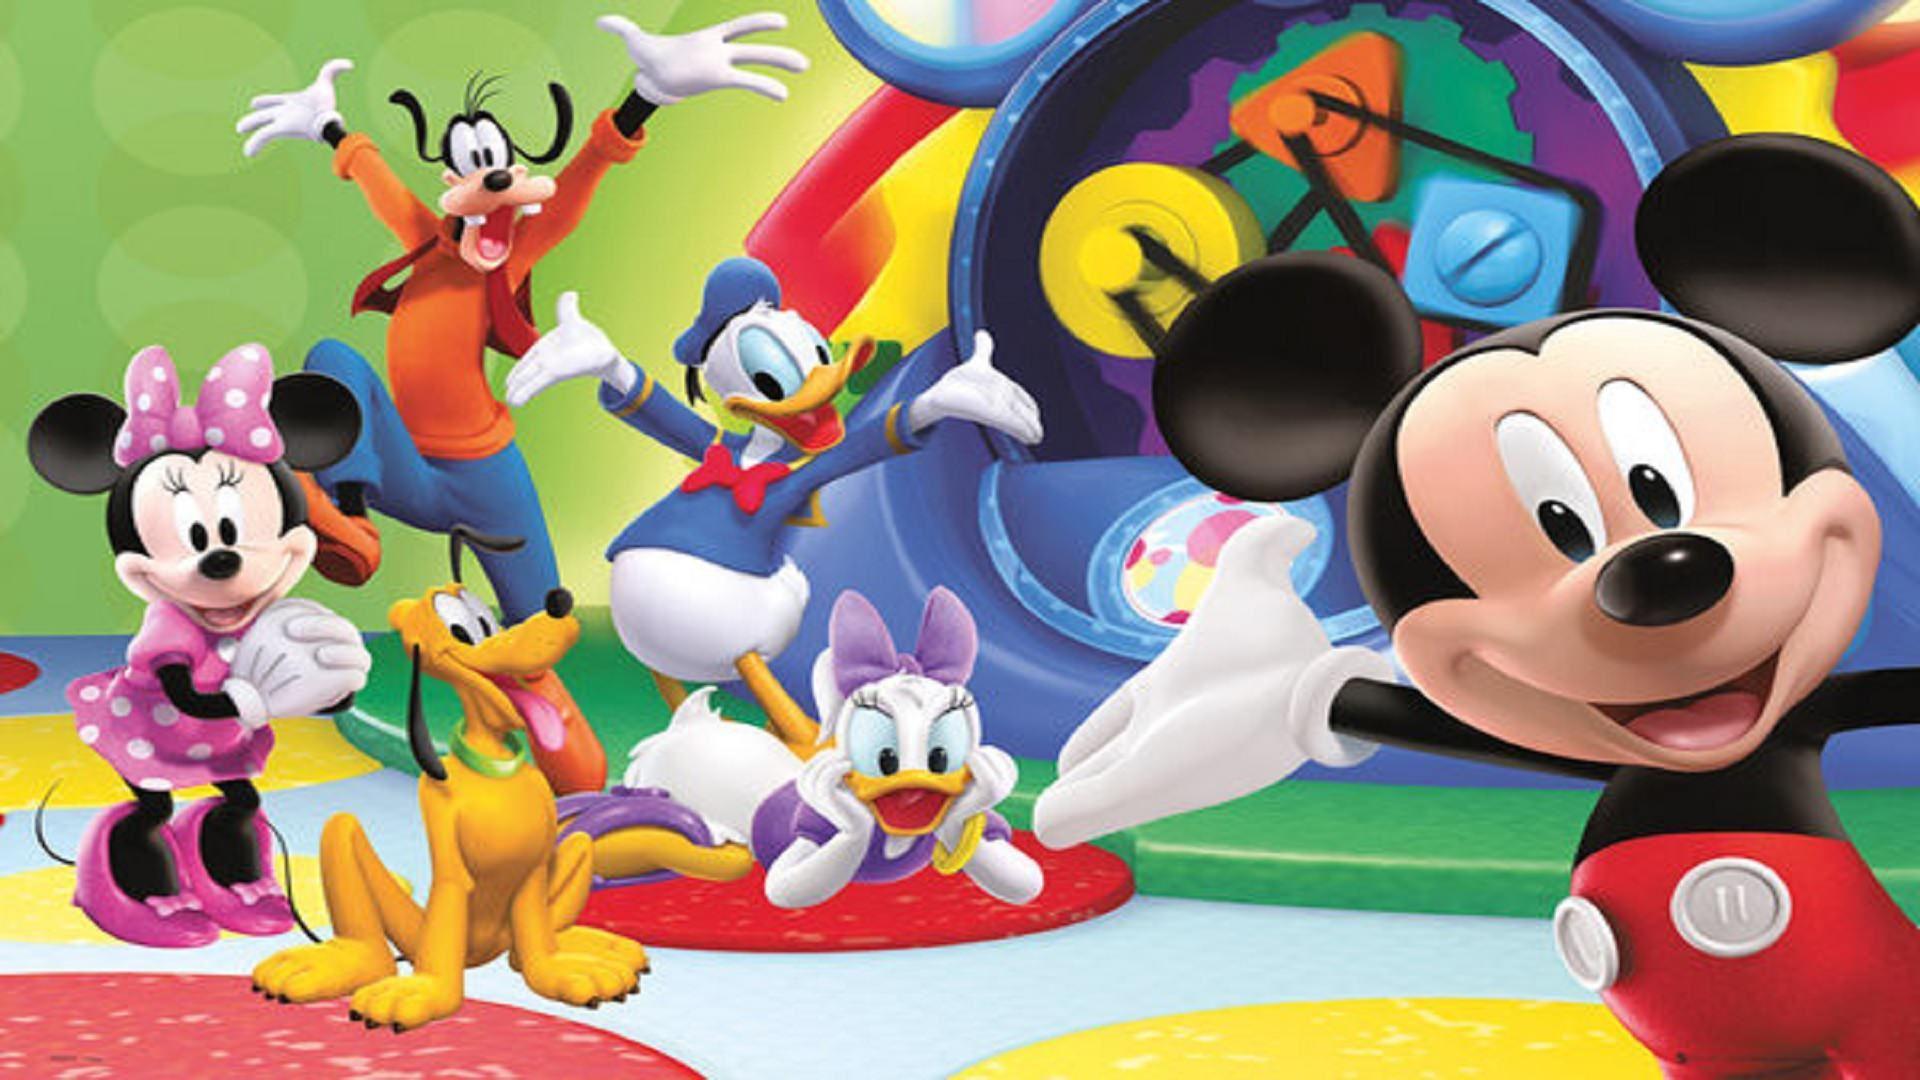 Download Mickey Mouse Clubhouse wallpapers for mobile phone free Mickey  Mouse Clubhouse HD pictures